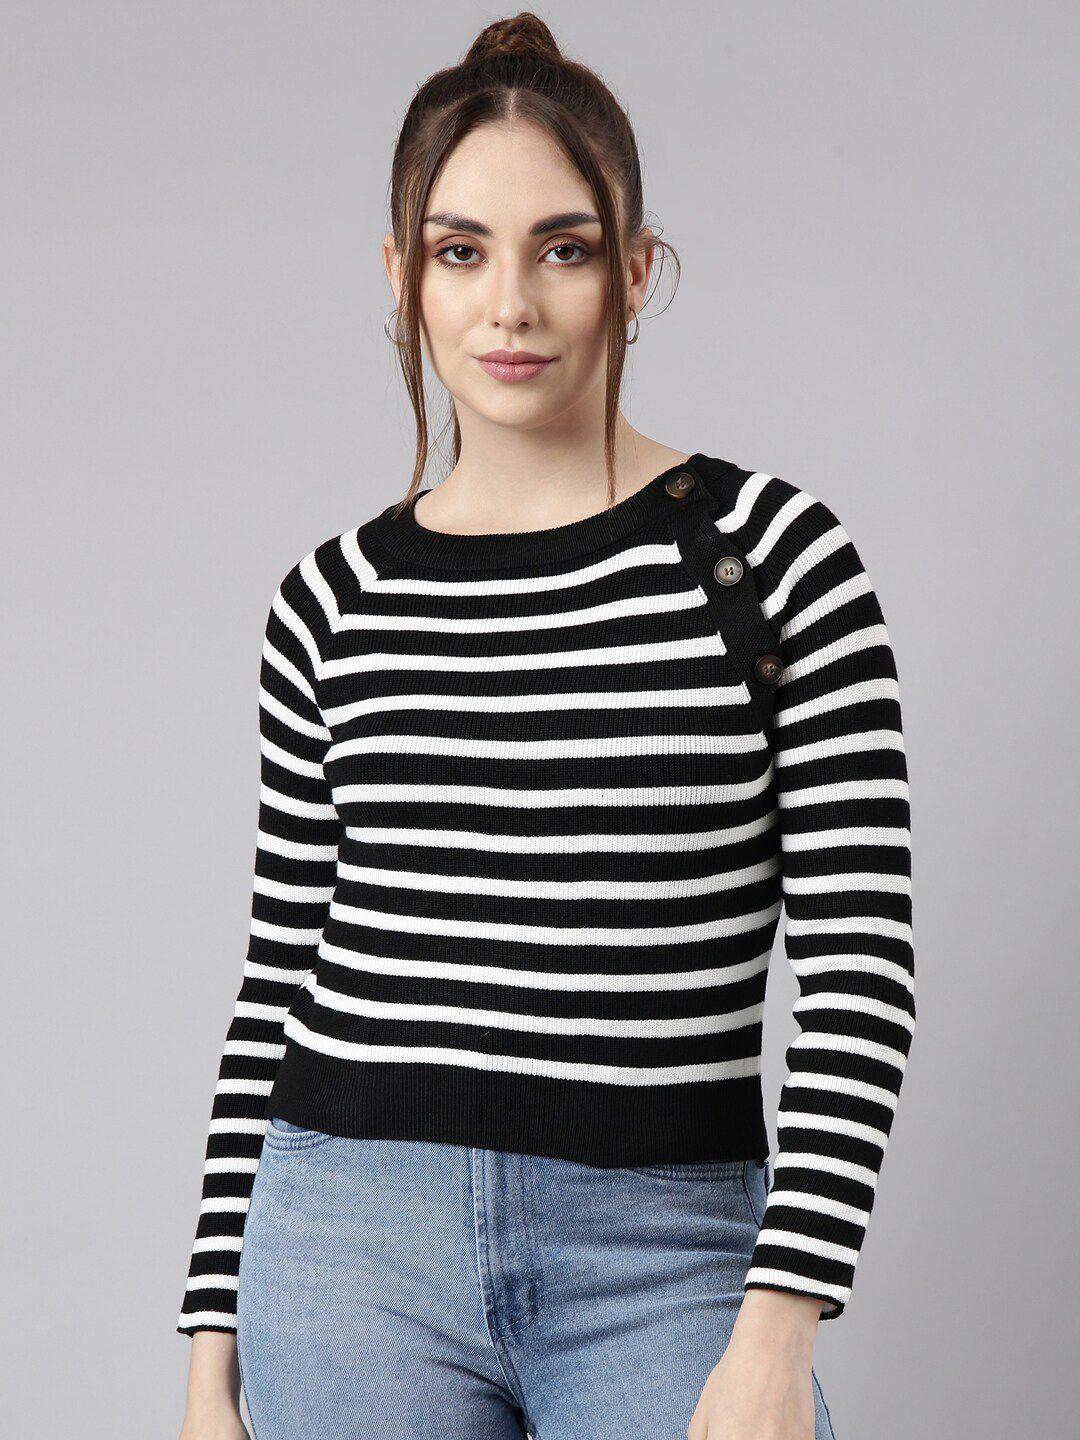 showoff horizontal stripes fitted top